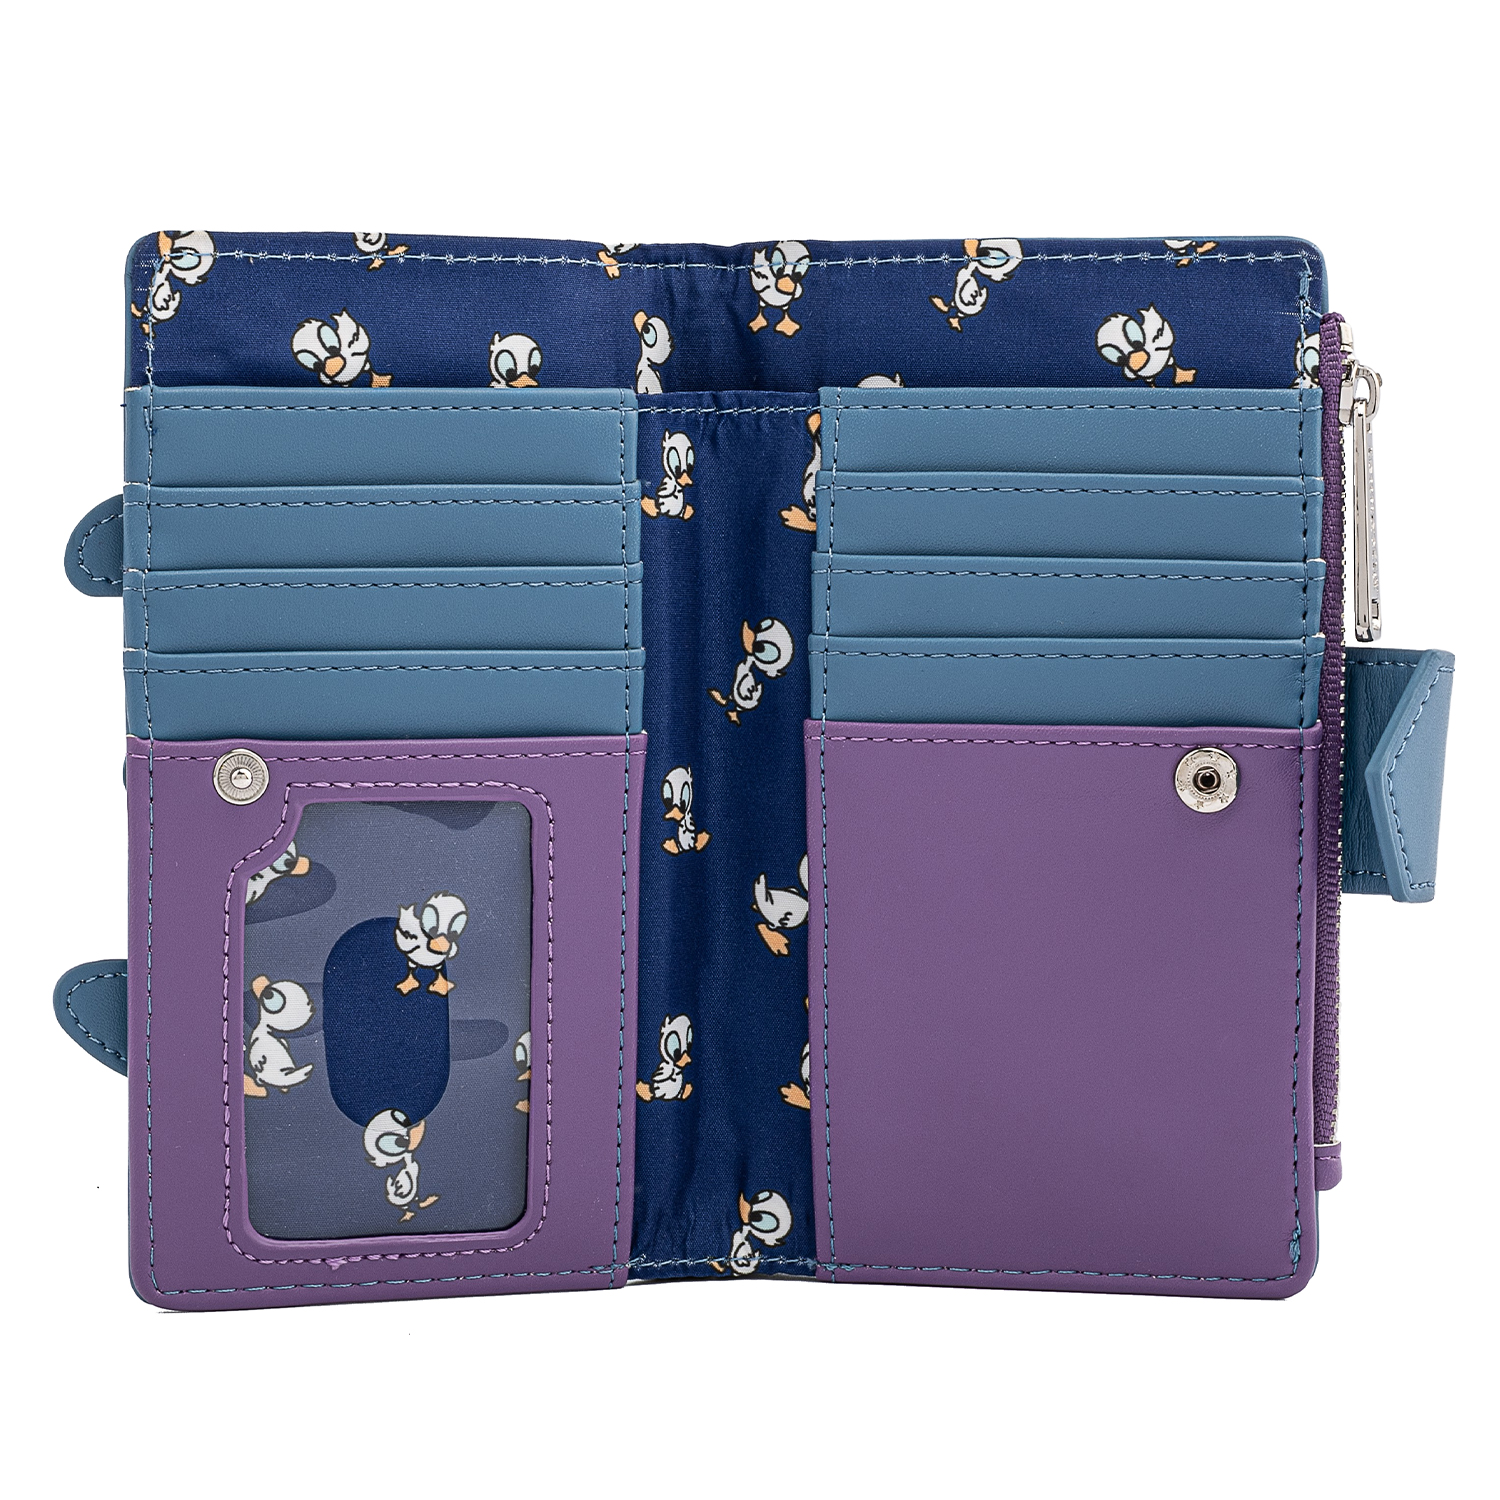 Stitch and Ducks Loungefly Flap Wallet